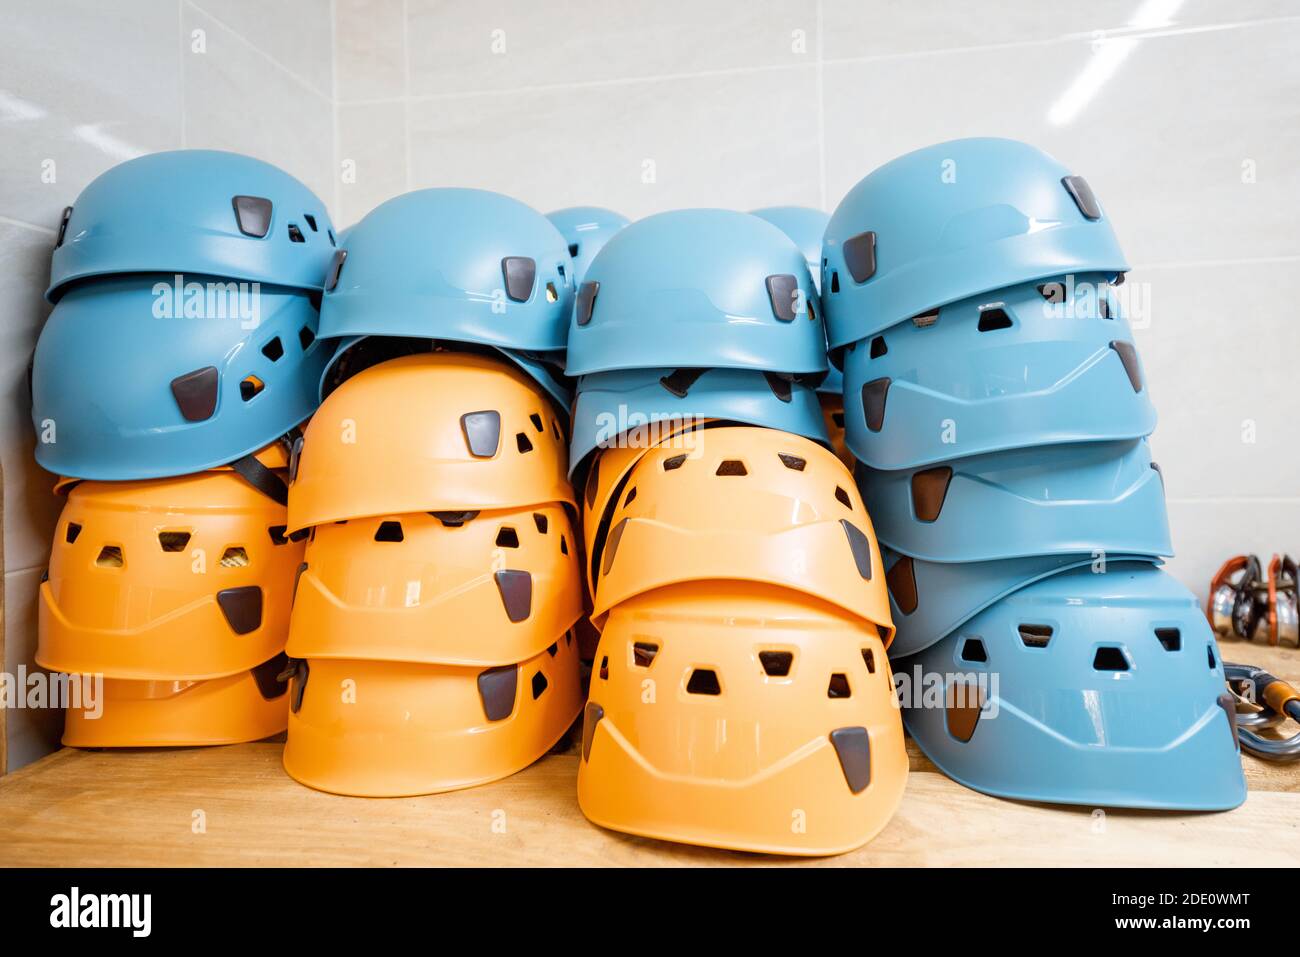 Hardhats and other safety equipment on the shelves at amusement park warehouse Stock Photo